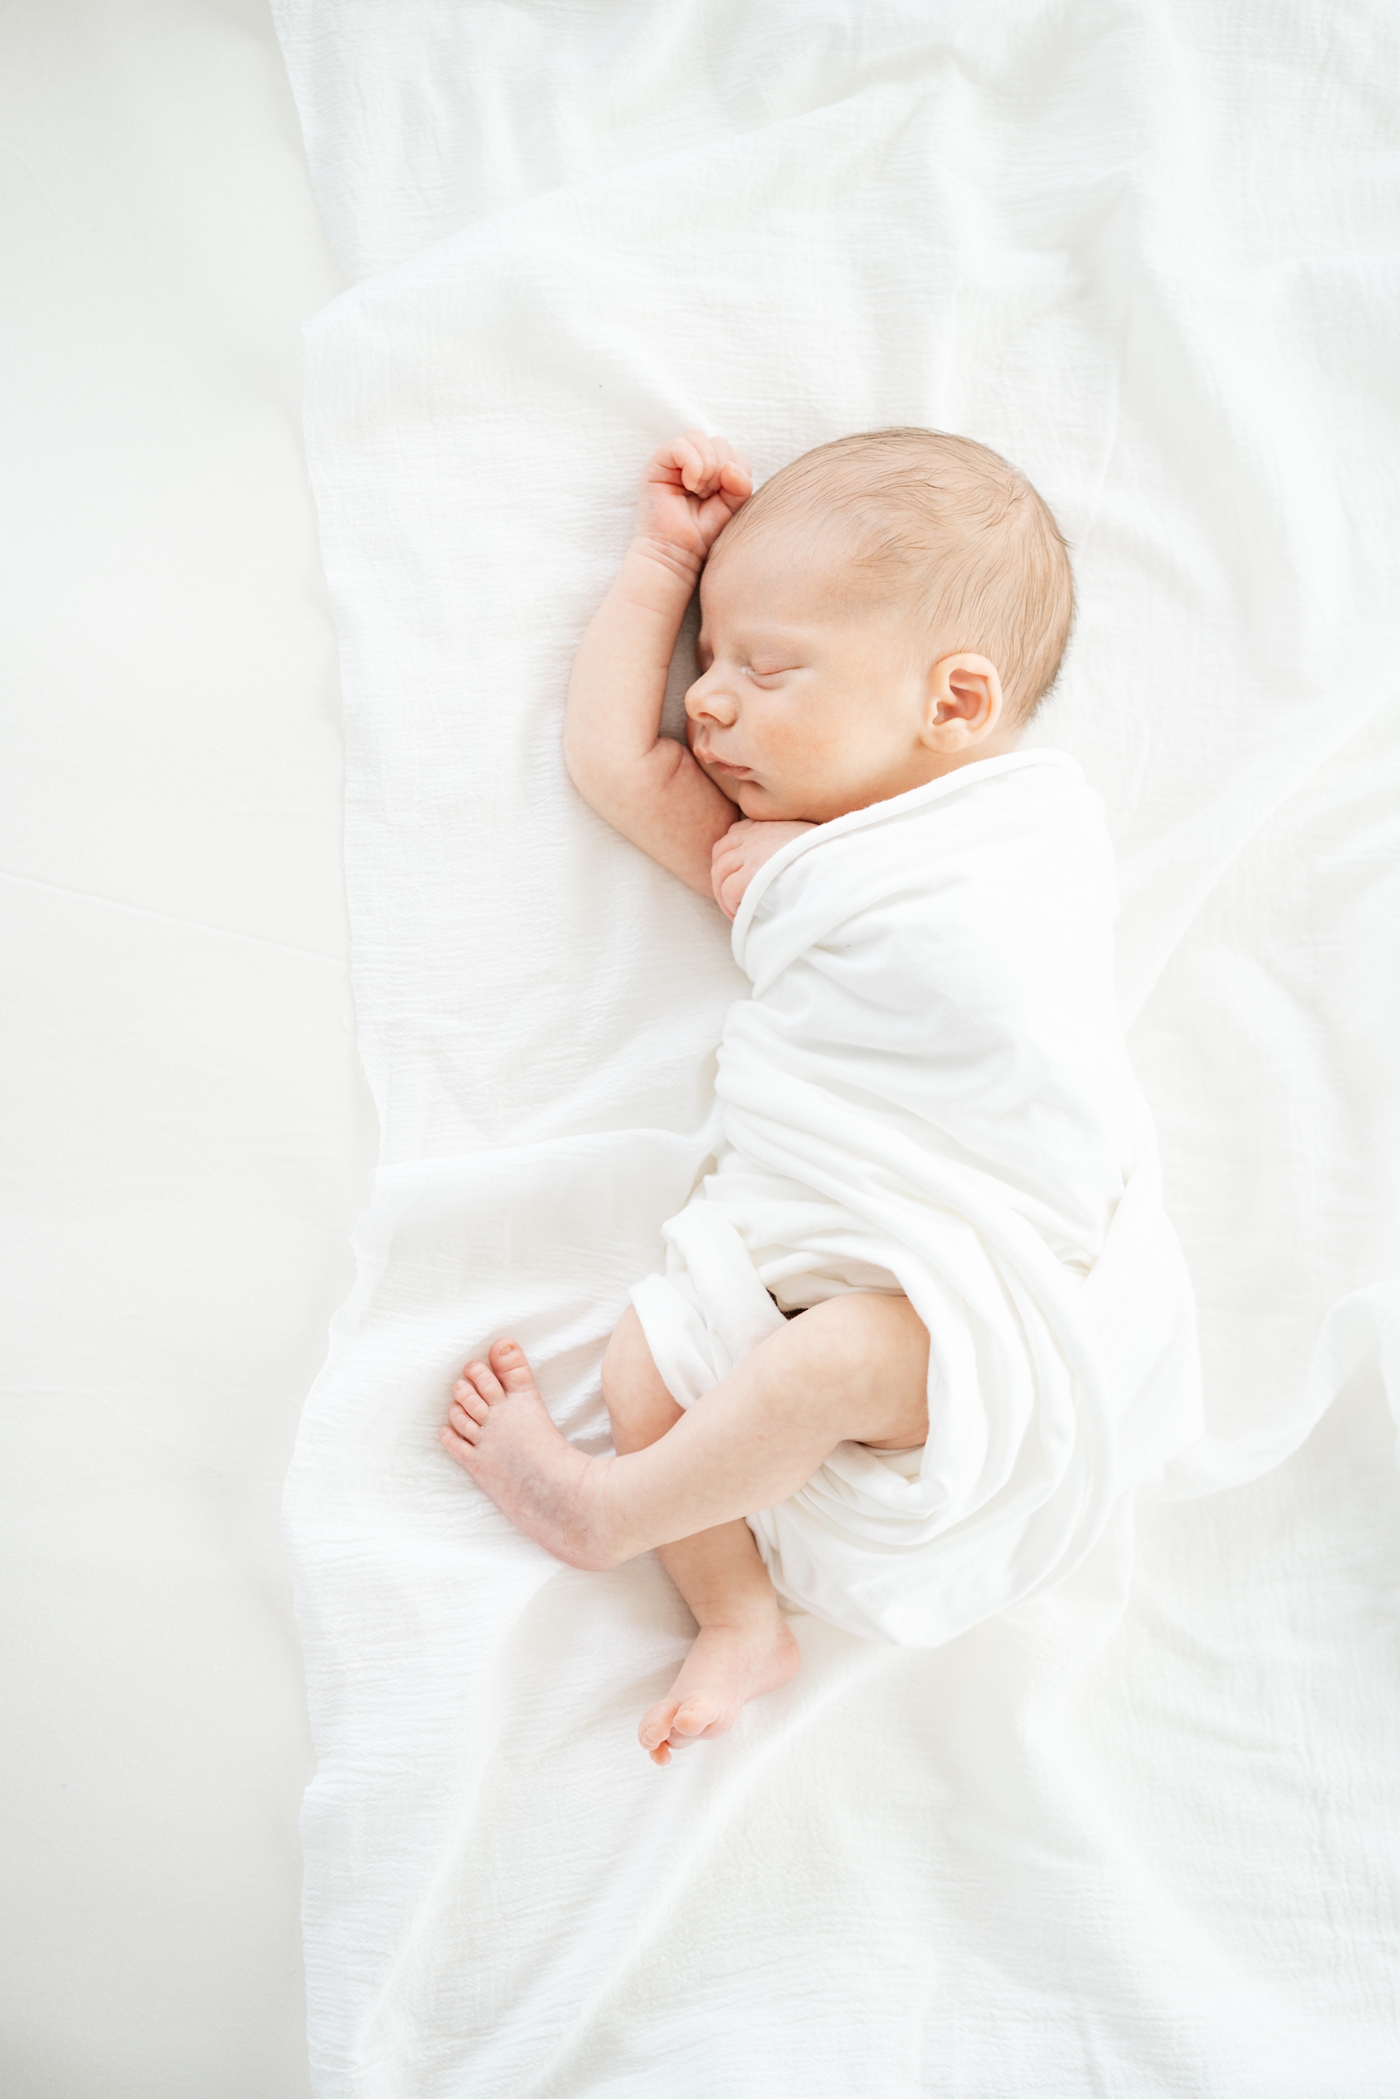 Baby boy sleeping in white swaddle during in-home lifestyle newborn session in Asheville NC. Photo by Lauren Sosler Photography.